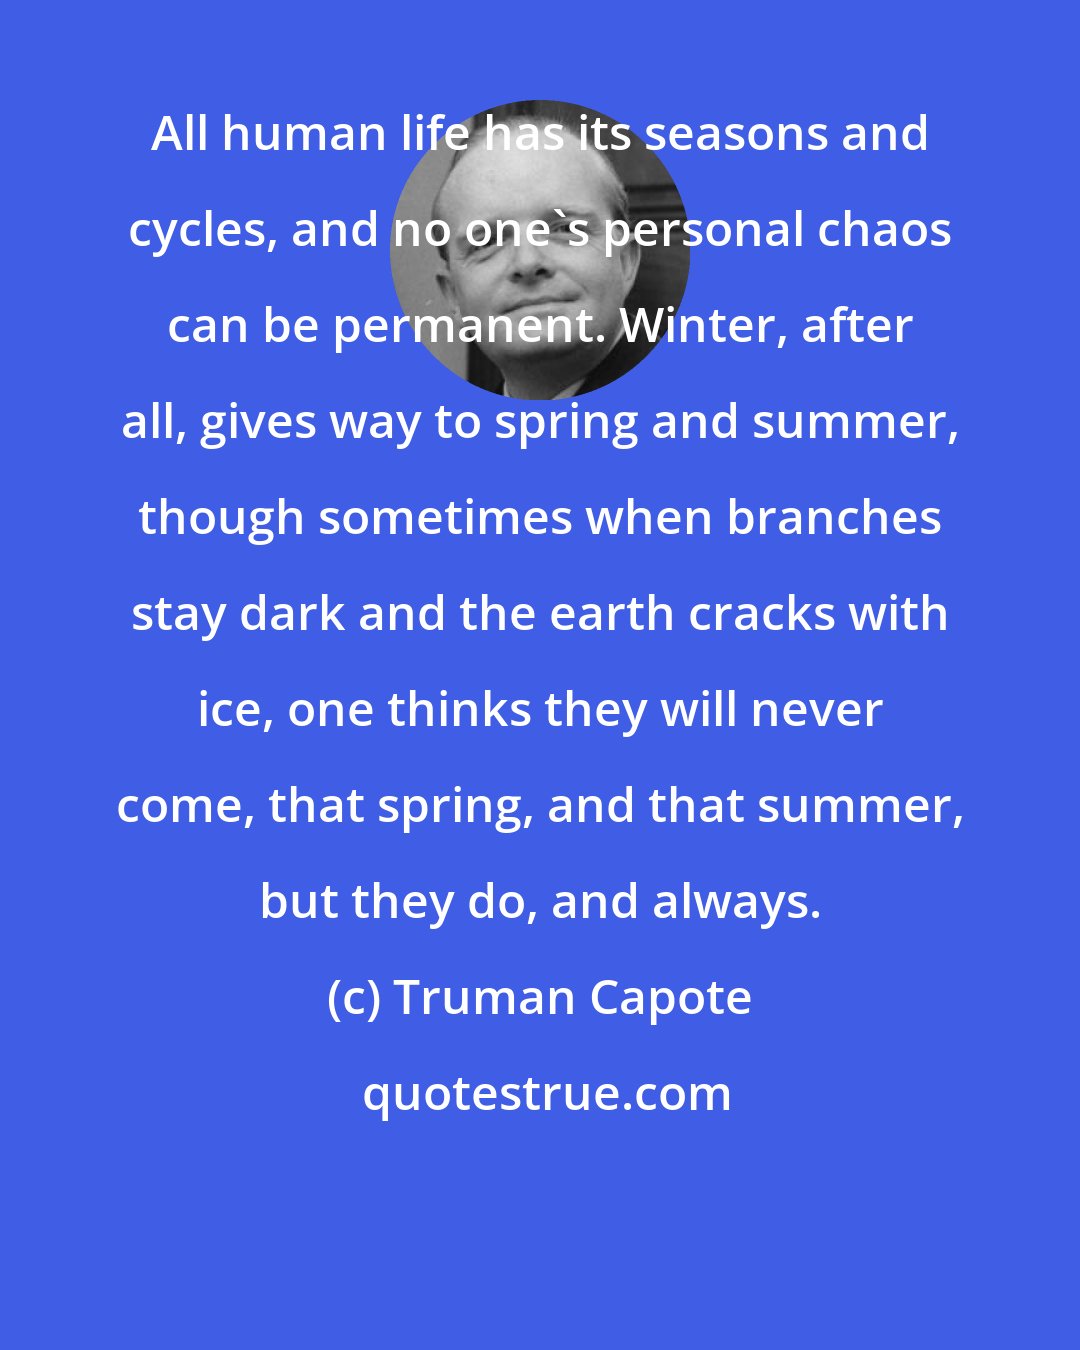 Truman Capote: All human life has its seasons and cycles, and no one's personal chaos can be permanent. Winter, after all, gives way to spring and summer, though sometimes when branches stay dark and the earth cracks with ice, one thinks they will never come, that spring, and that summer, but they do, and always.